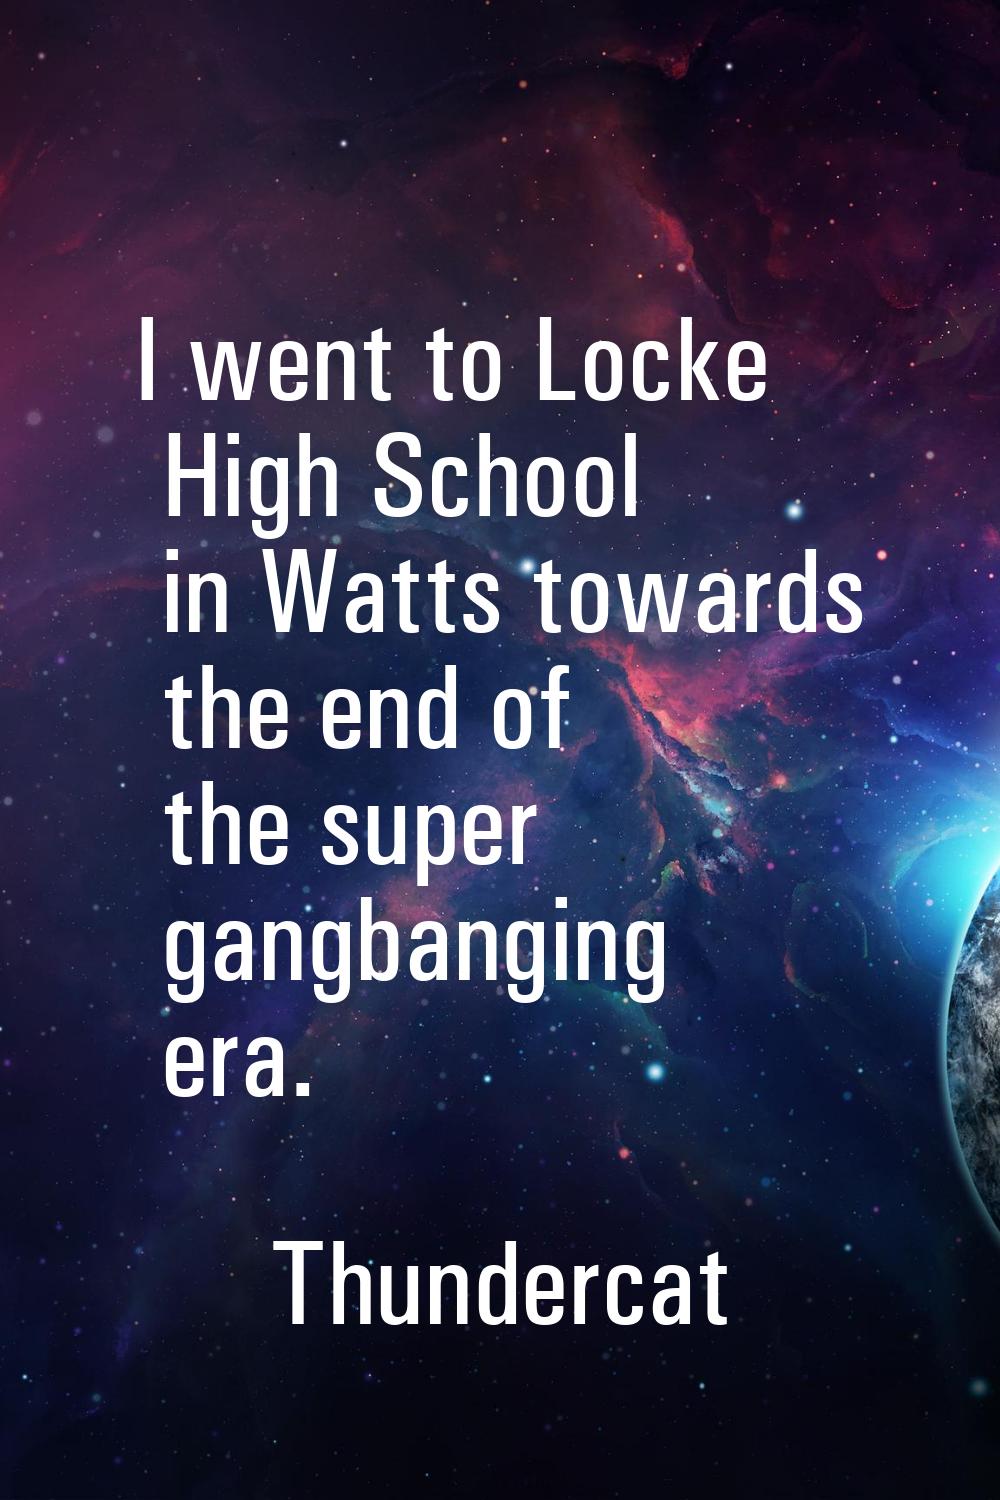 I went to Locke High School in Watts towards the end of the super gangbanging era.